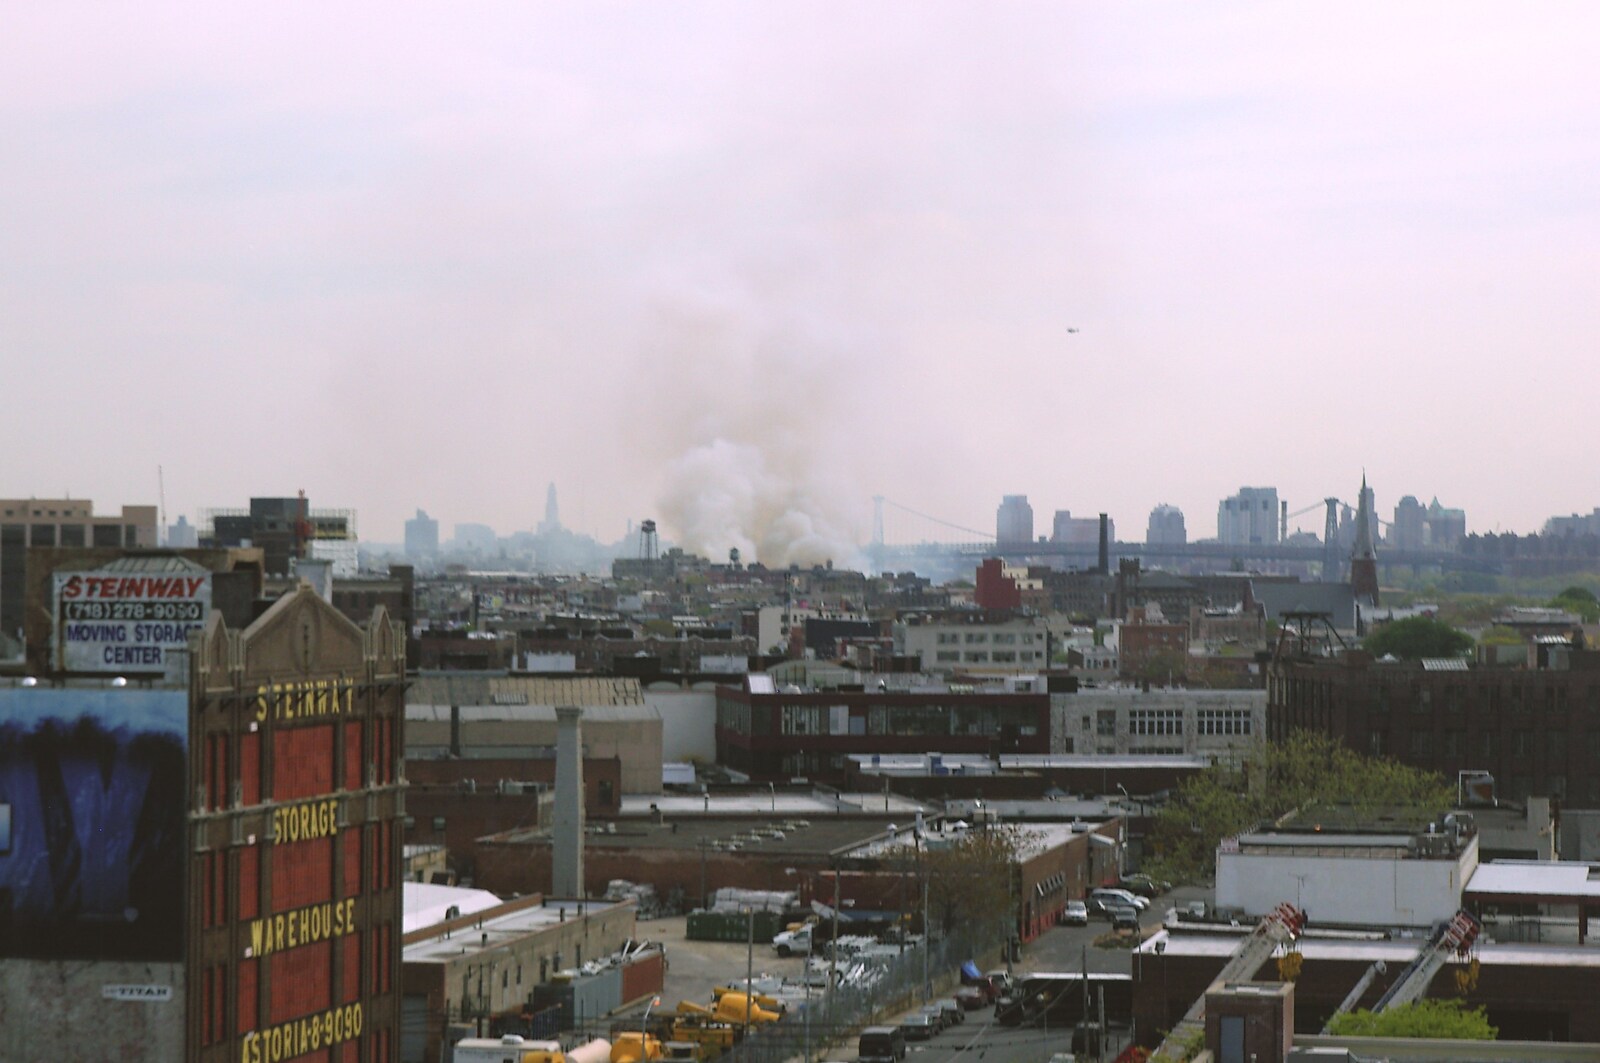 A warehouse fire at Greenpoint, Brooklyn from A Union Square Demo, Bryant Park and Columbus Circle, New York, US - 2nd May 2006